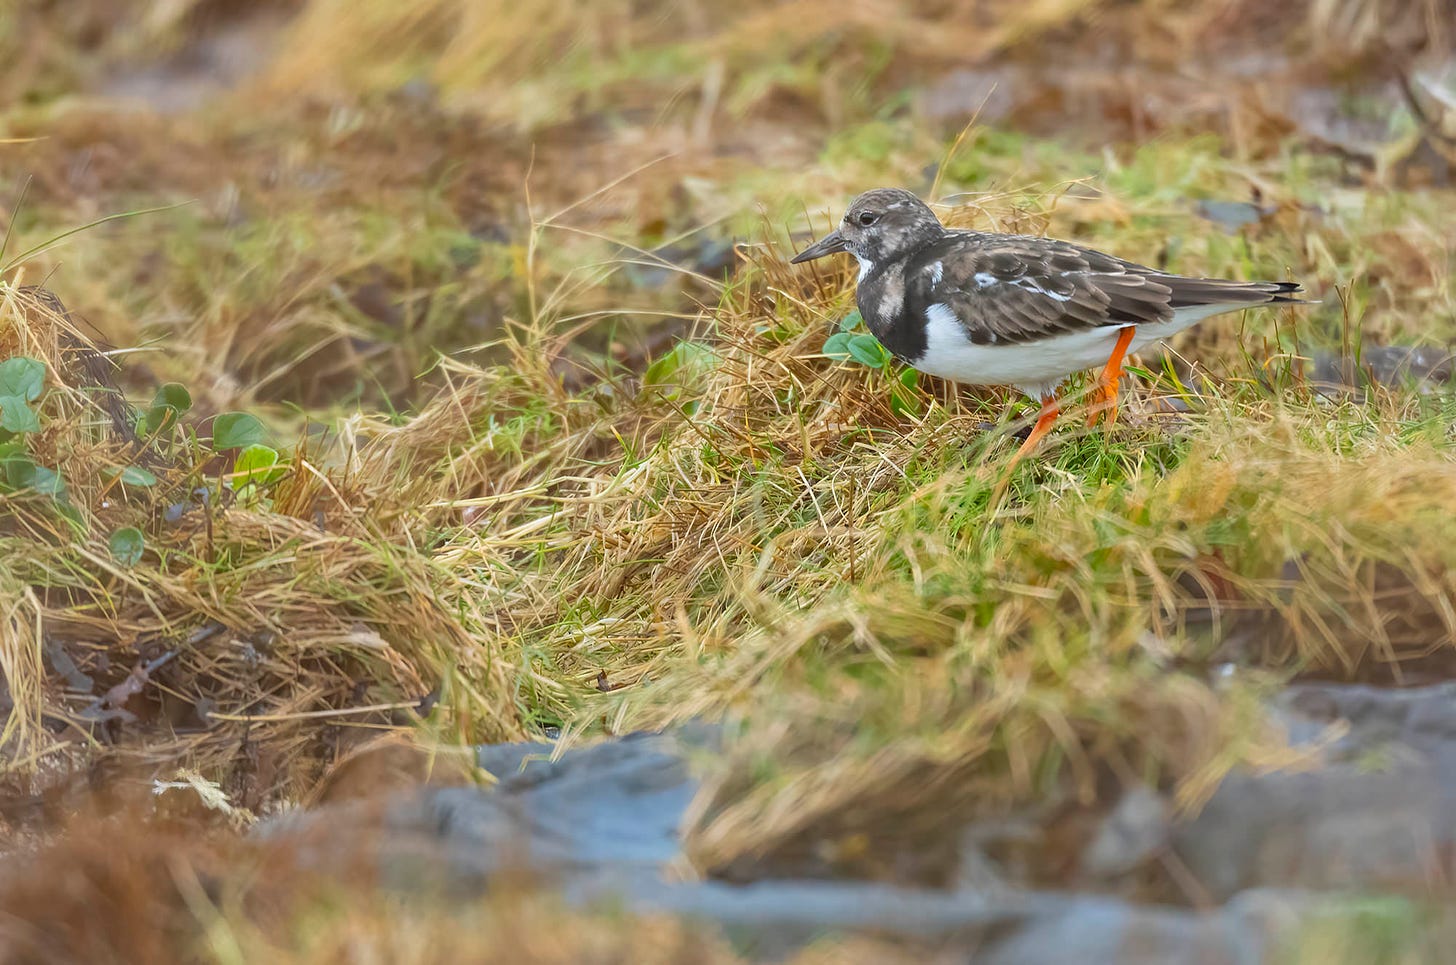 Photo of a turnstone walking across grass-covered rocks